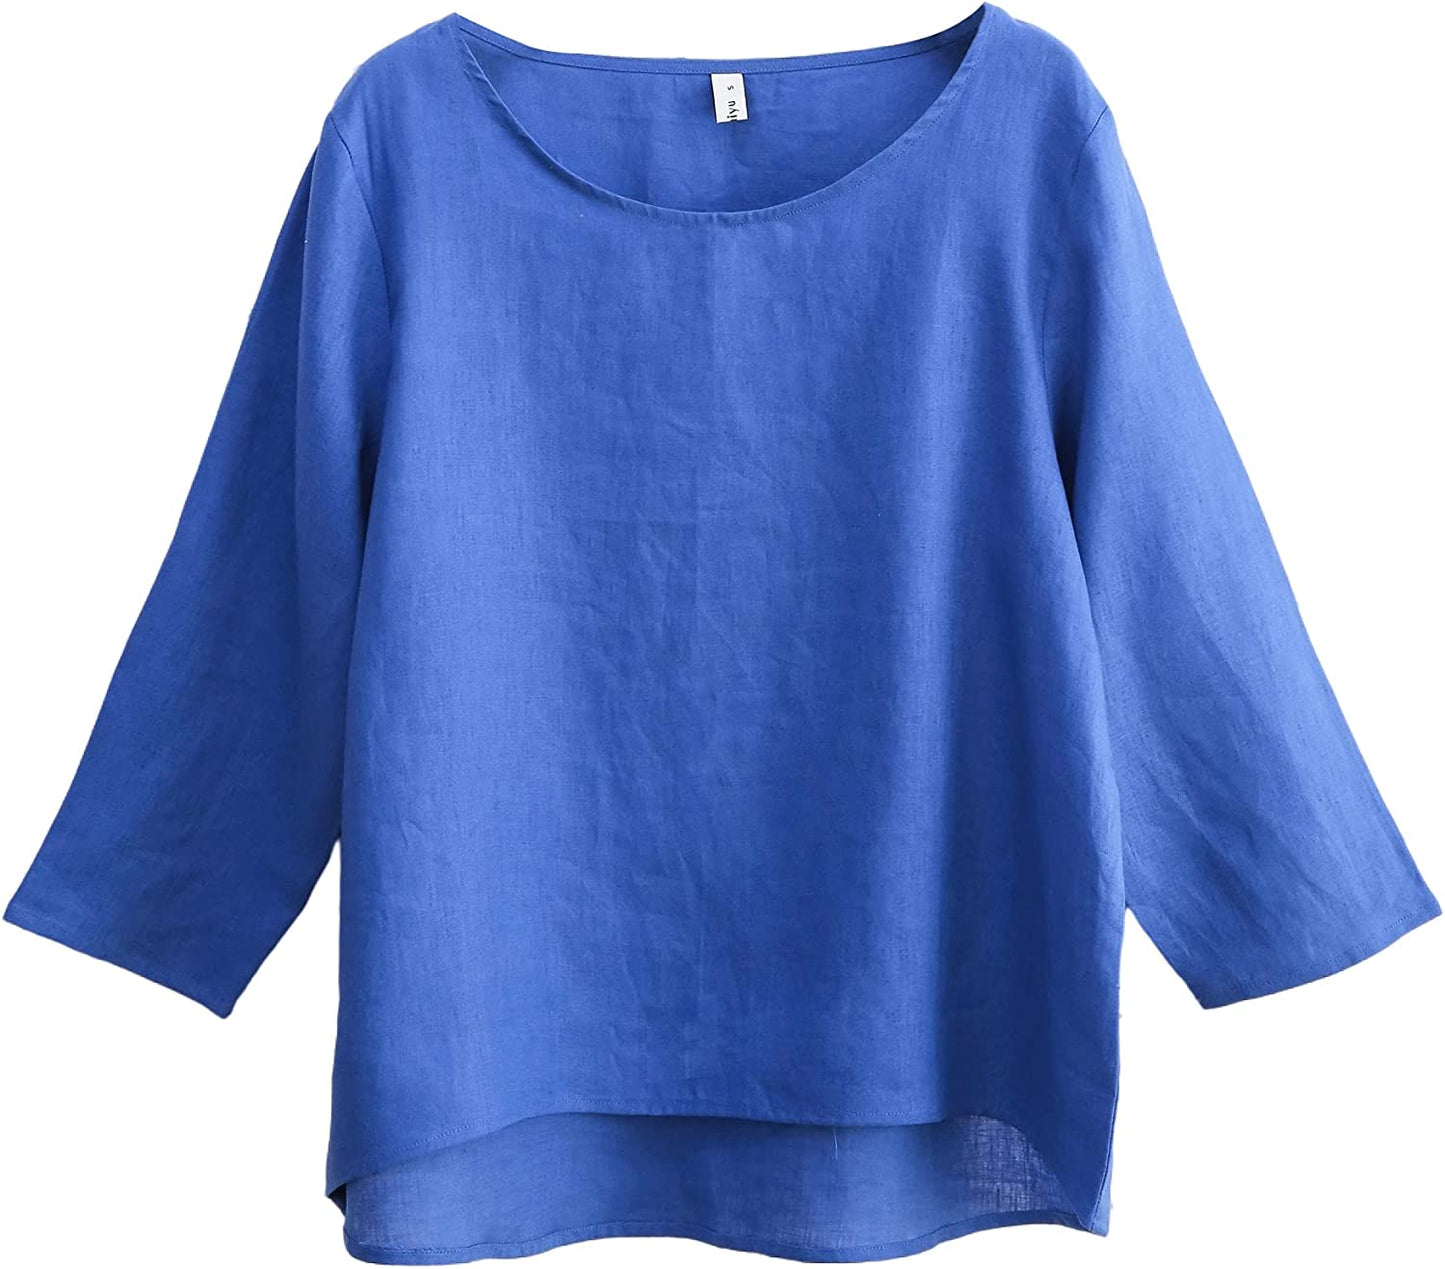 Casual Cotton Linen Tops for Womens Solid 3/4 Sleeve Summer Tops